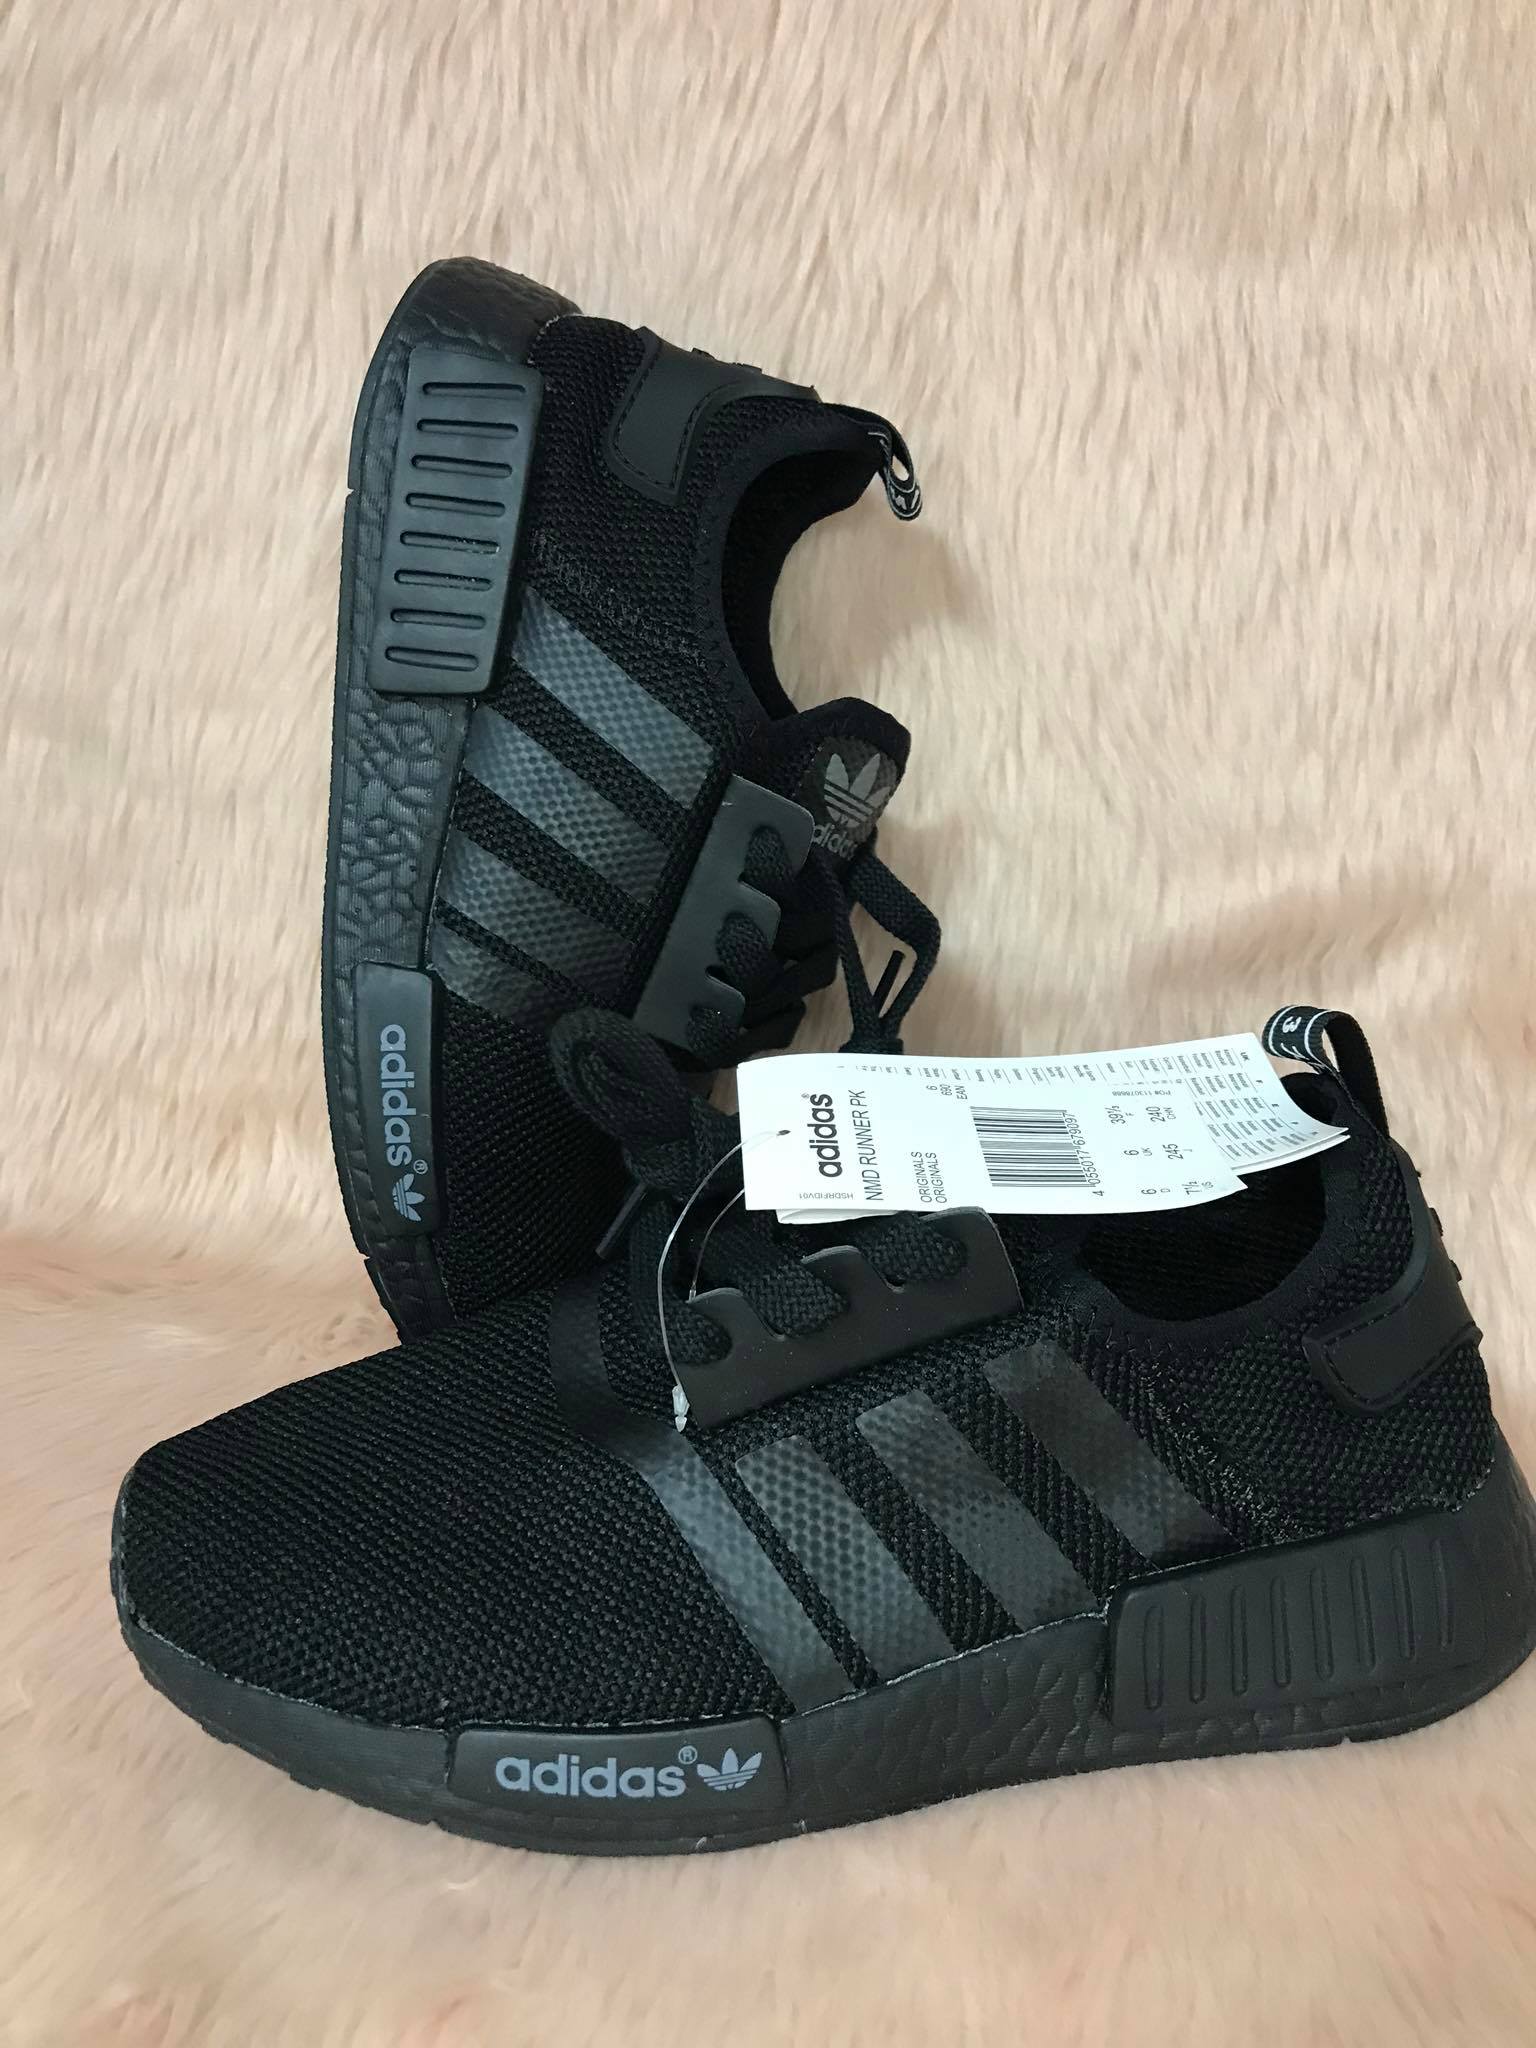 NMD ADIDAS RUNNING SHOES: Buy sell 